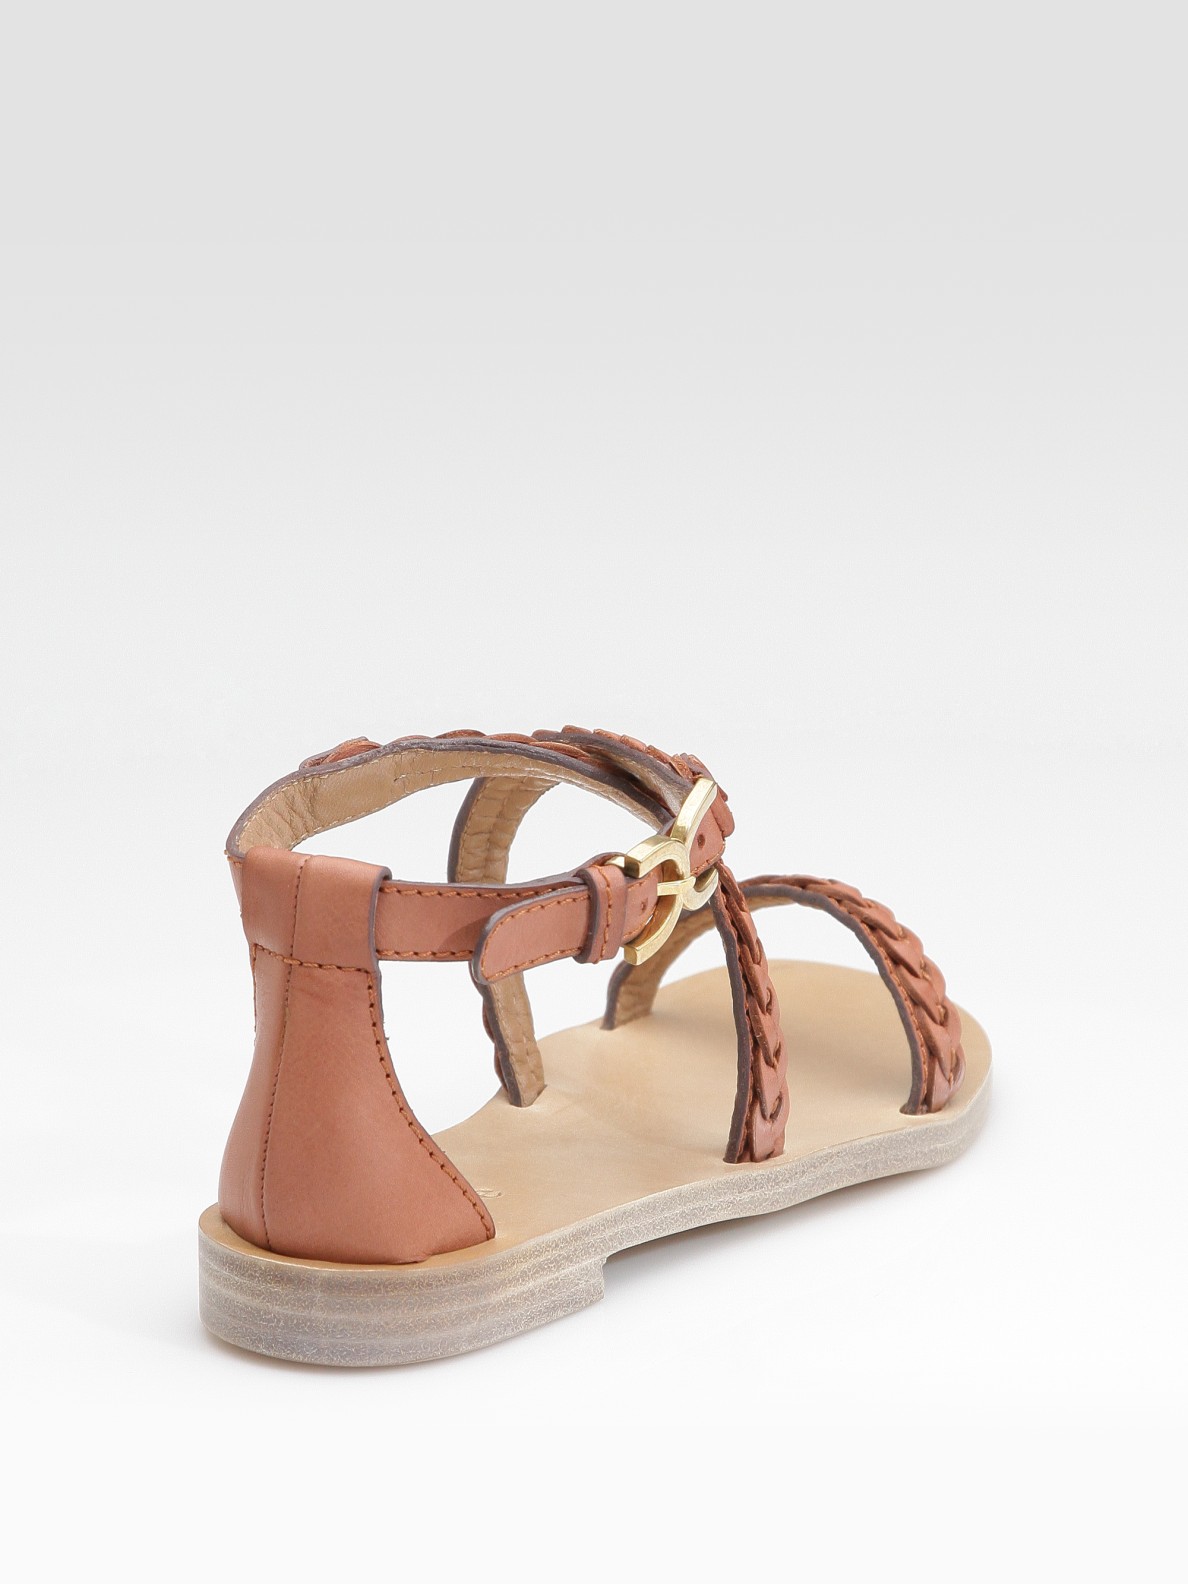 Chloé Braided Leather Flat Sandals In Brown Lyst